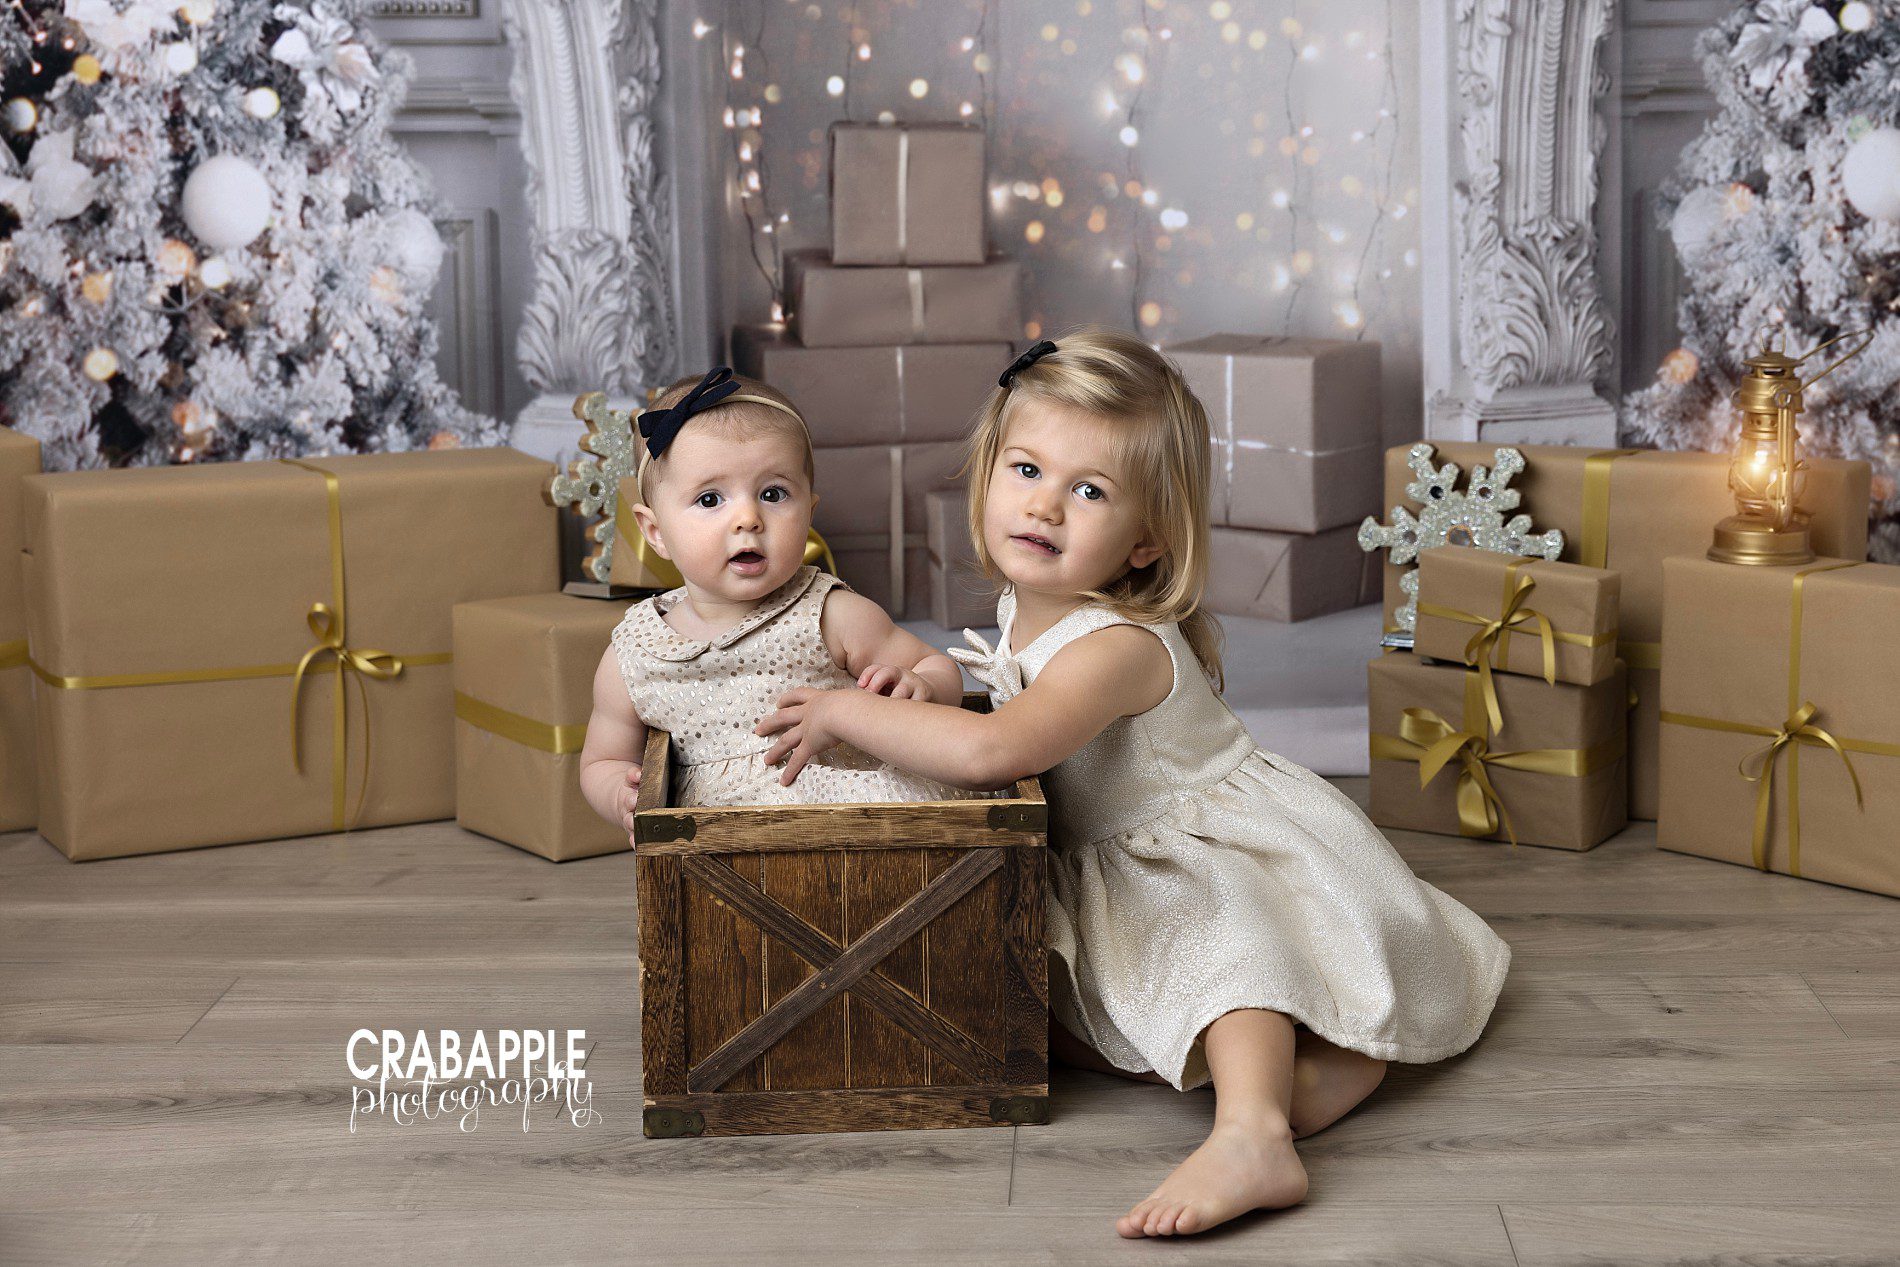 styling baby and toddler photos for holidays with white and gold